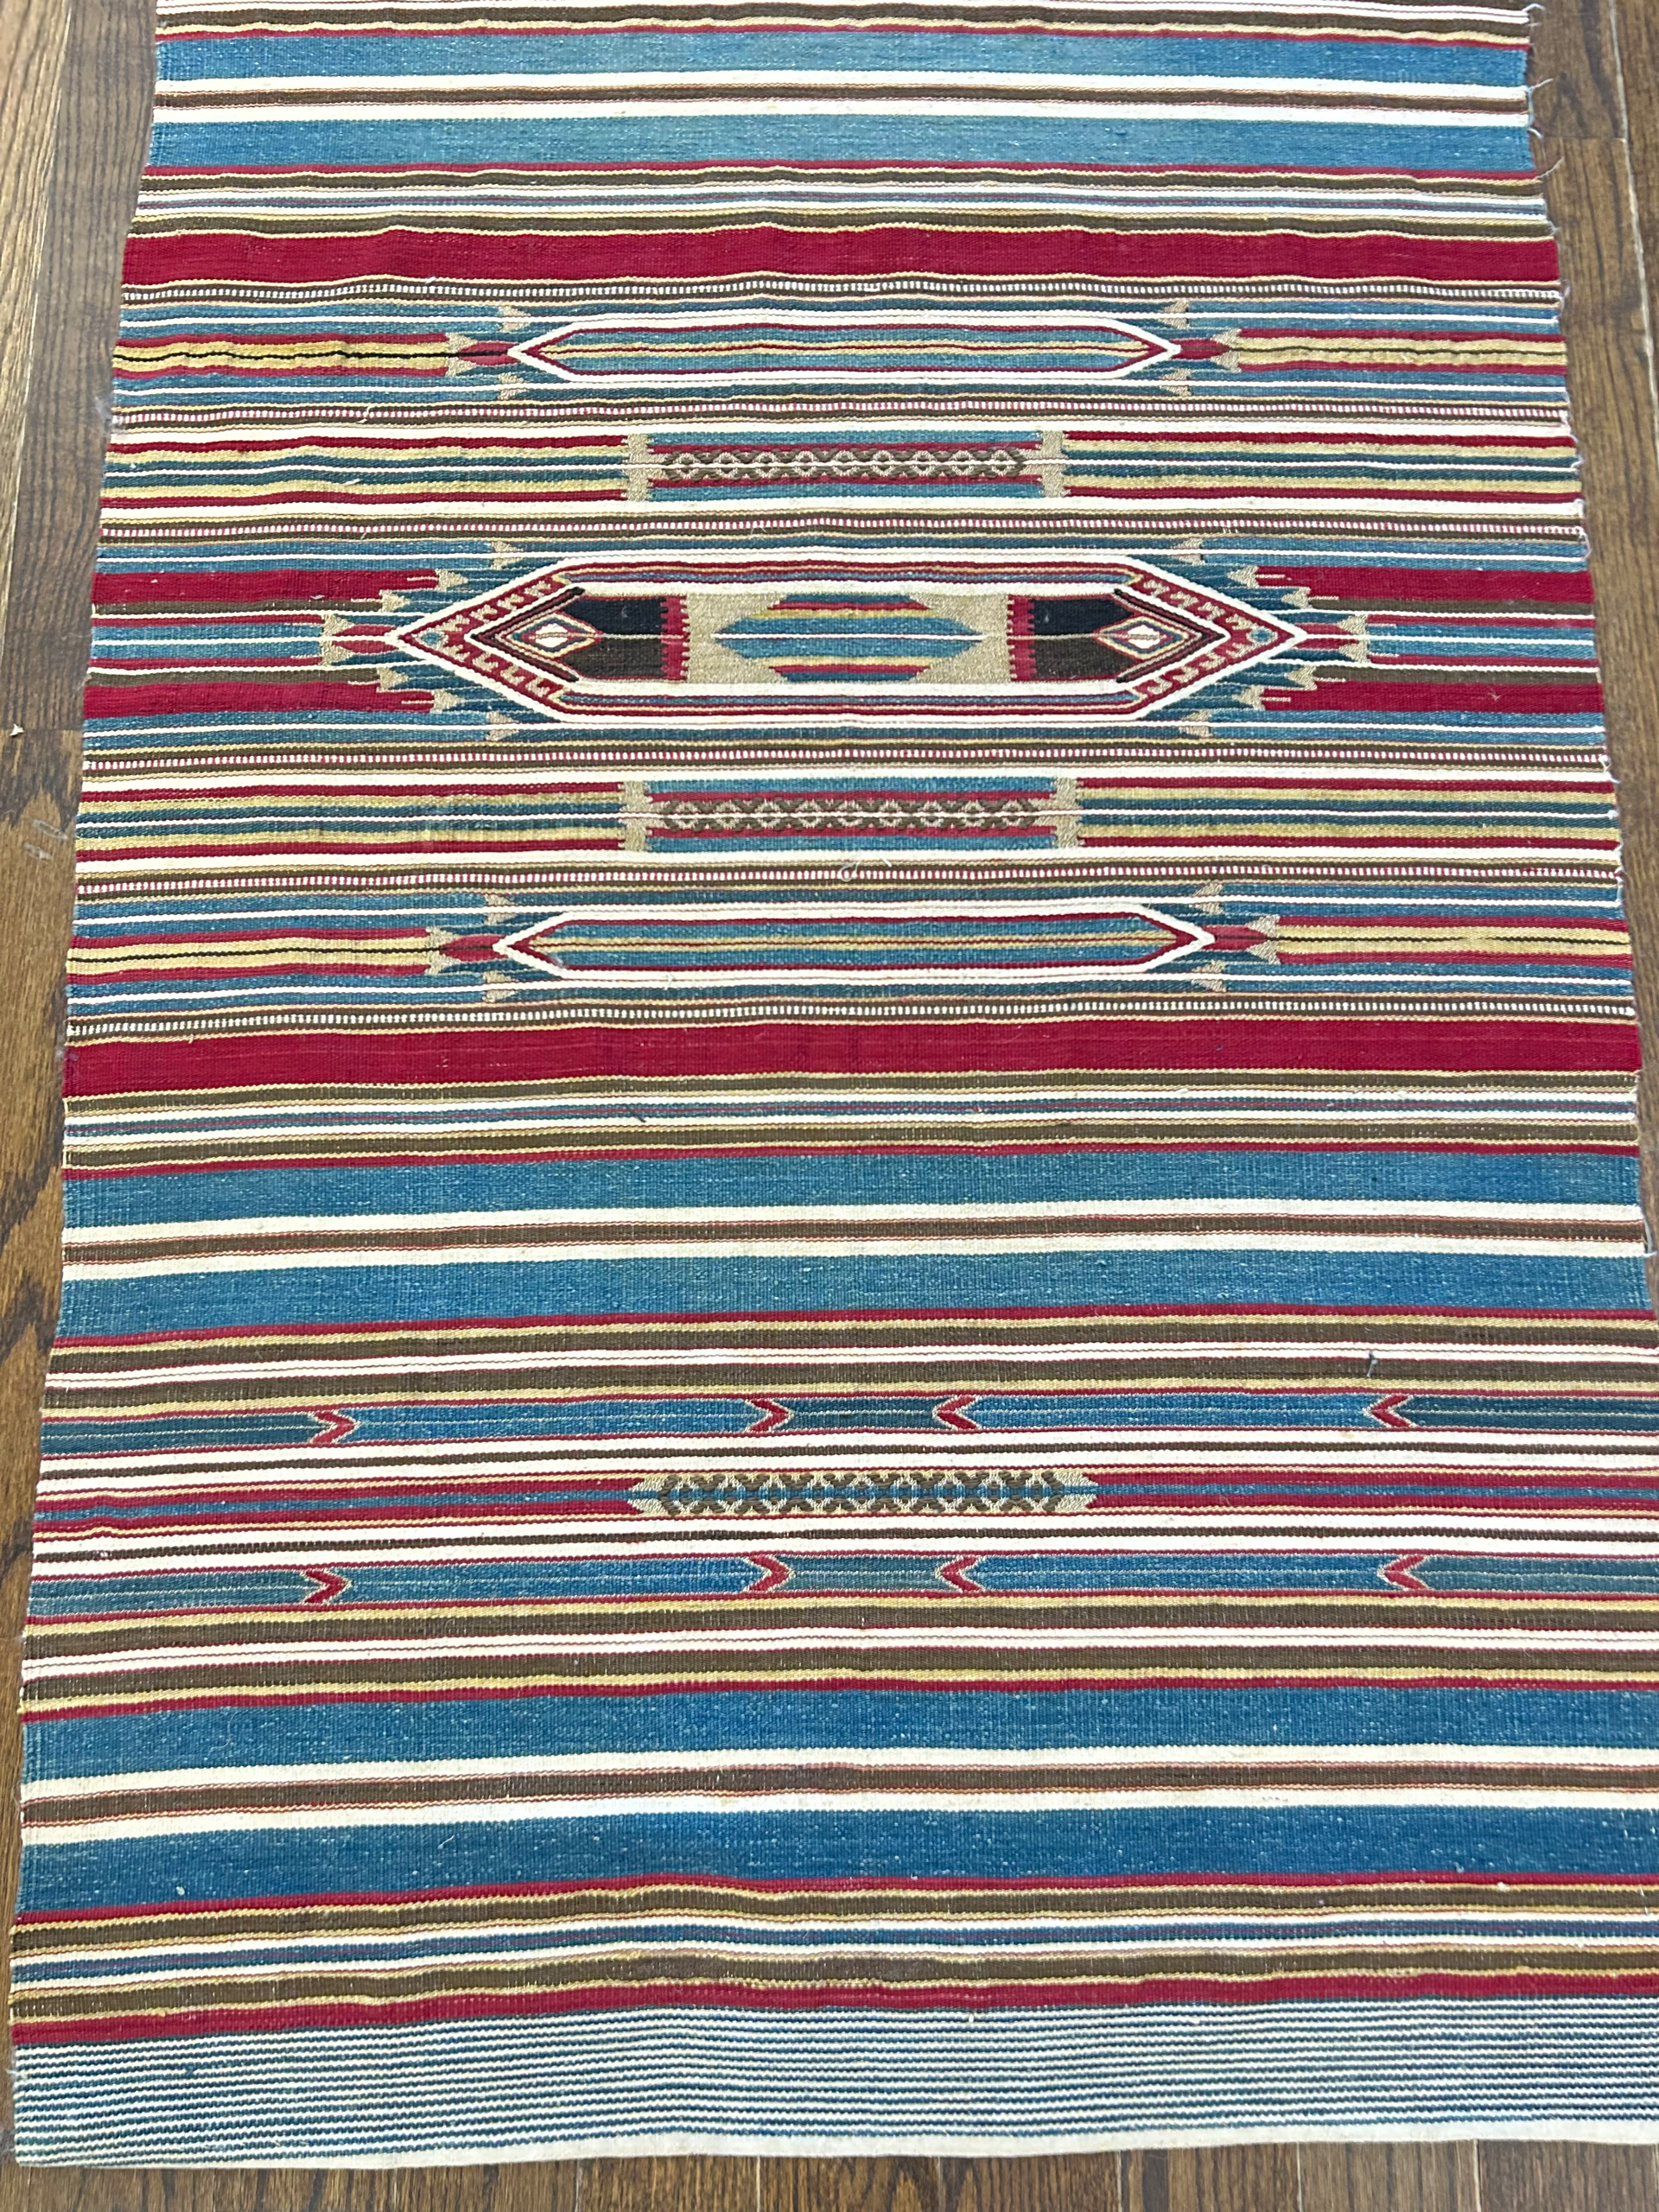 Antique Armenian kilim probably woven in Syria after the Turkish Armenian Genocide which took place in Turkey circa 1915-1916. The magnificent kilim runner rug was woven using wool with silk and metal thread highlights, probably in the 1920s.